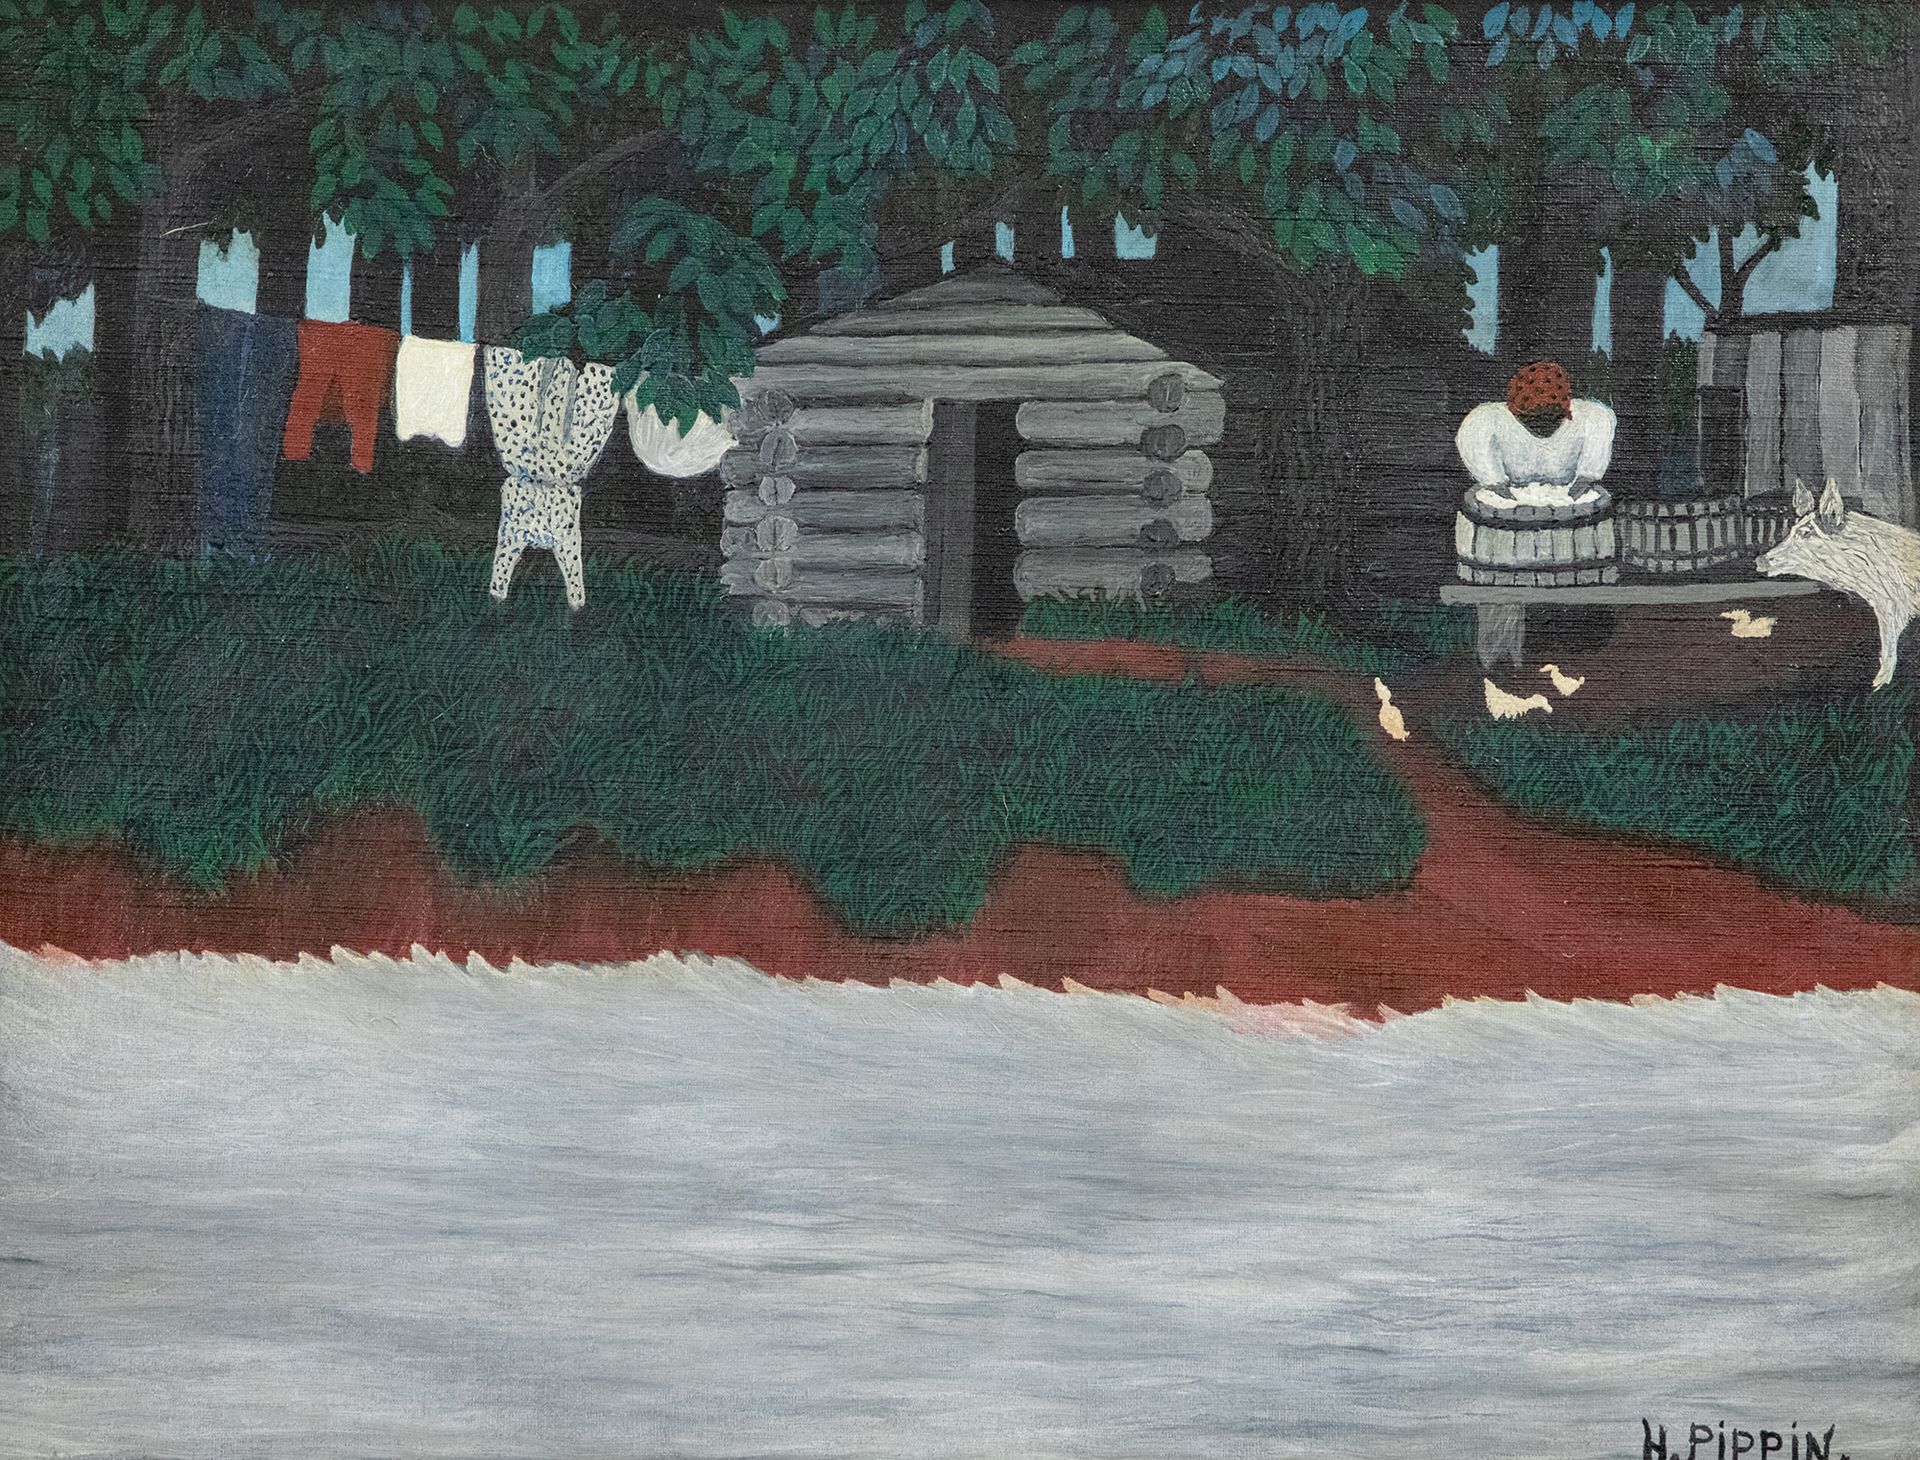 Horace Pippin's The Wash from around 1942, a gift of Laura and Richard Parsons American Folk Art Museum